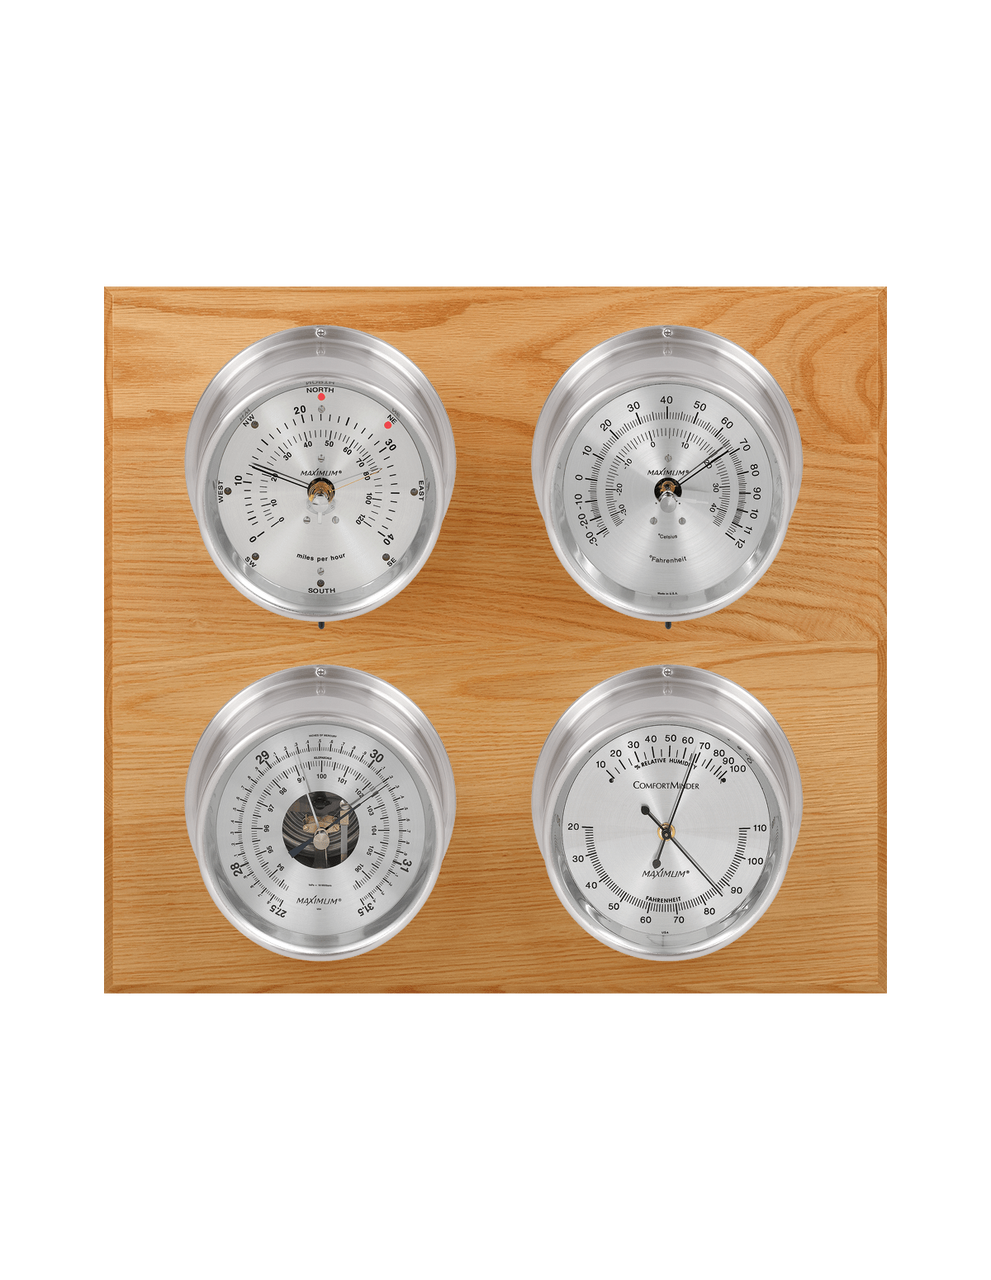 Observer Wind, Thermometer, Barometer, and Humidity Weather Station - 4 Instruments - Satin Nickel Cases - Oak - Silver Face - 2 Scales -Reads 0-120 mph